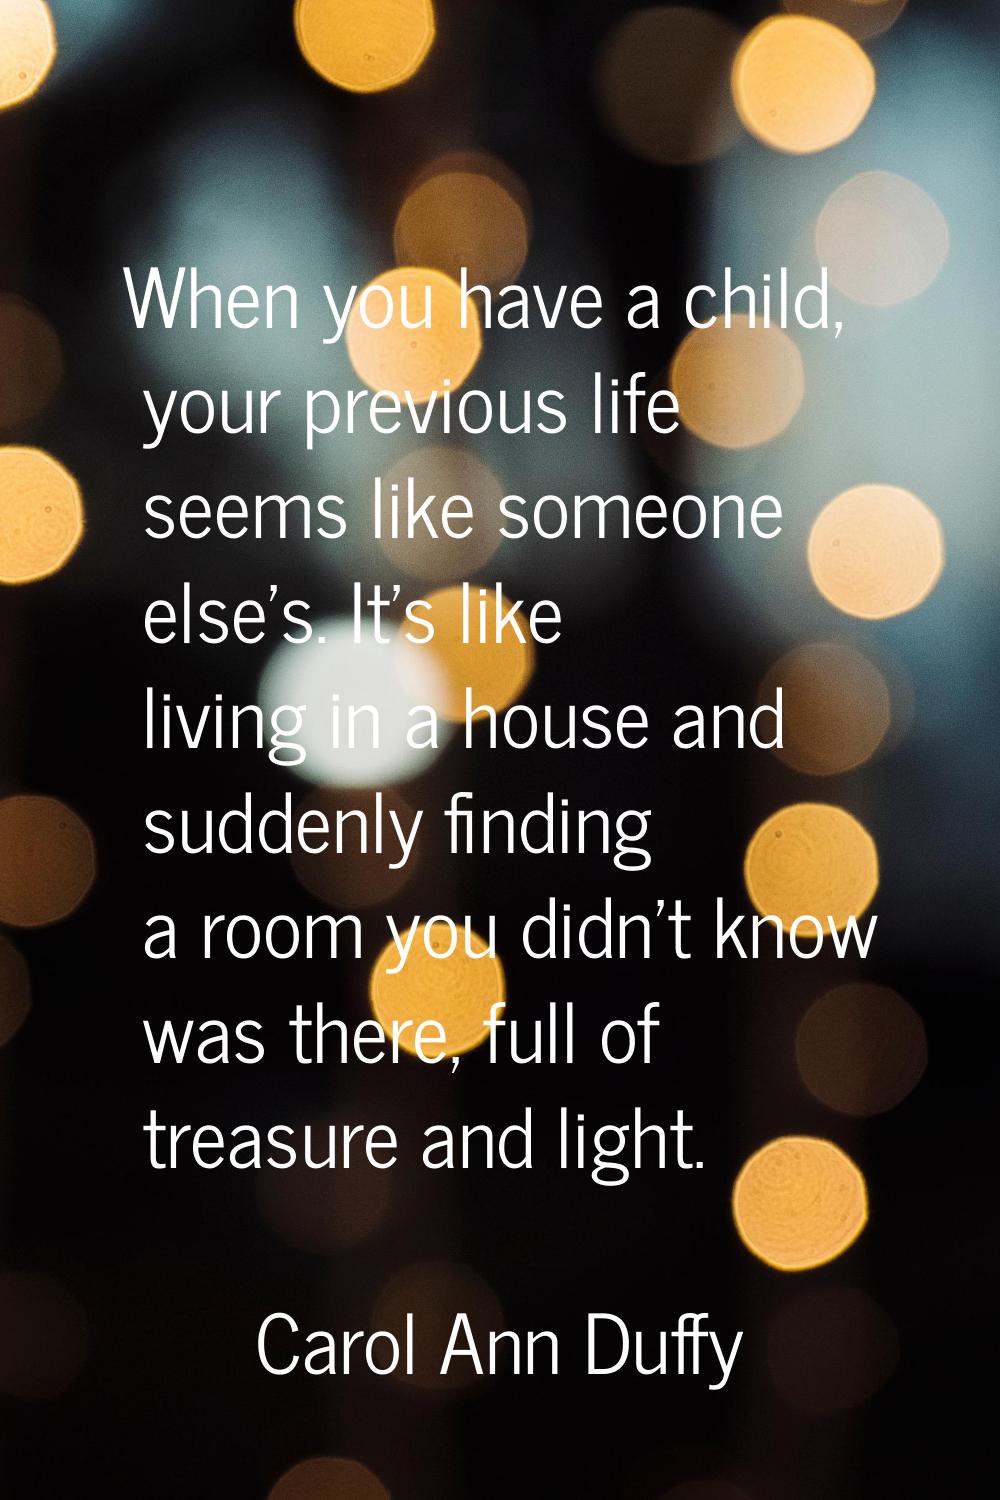 When you have a child, your previous life seems like someone else's. It's like living in a house an